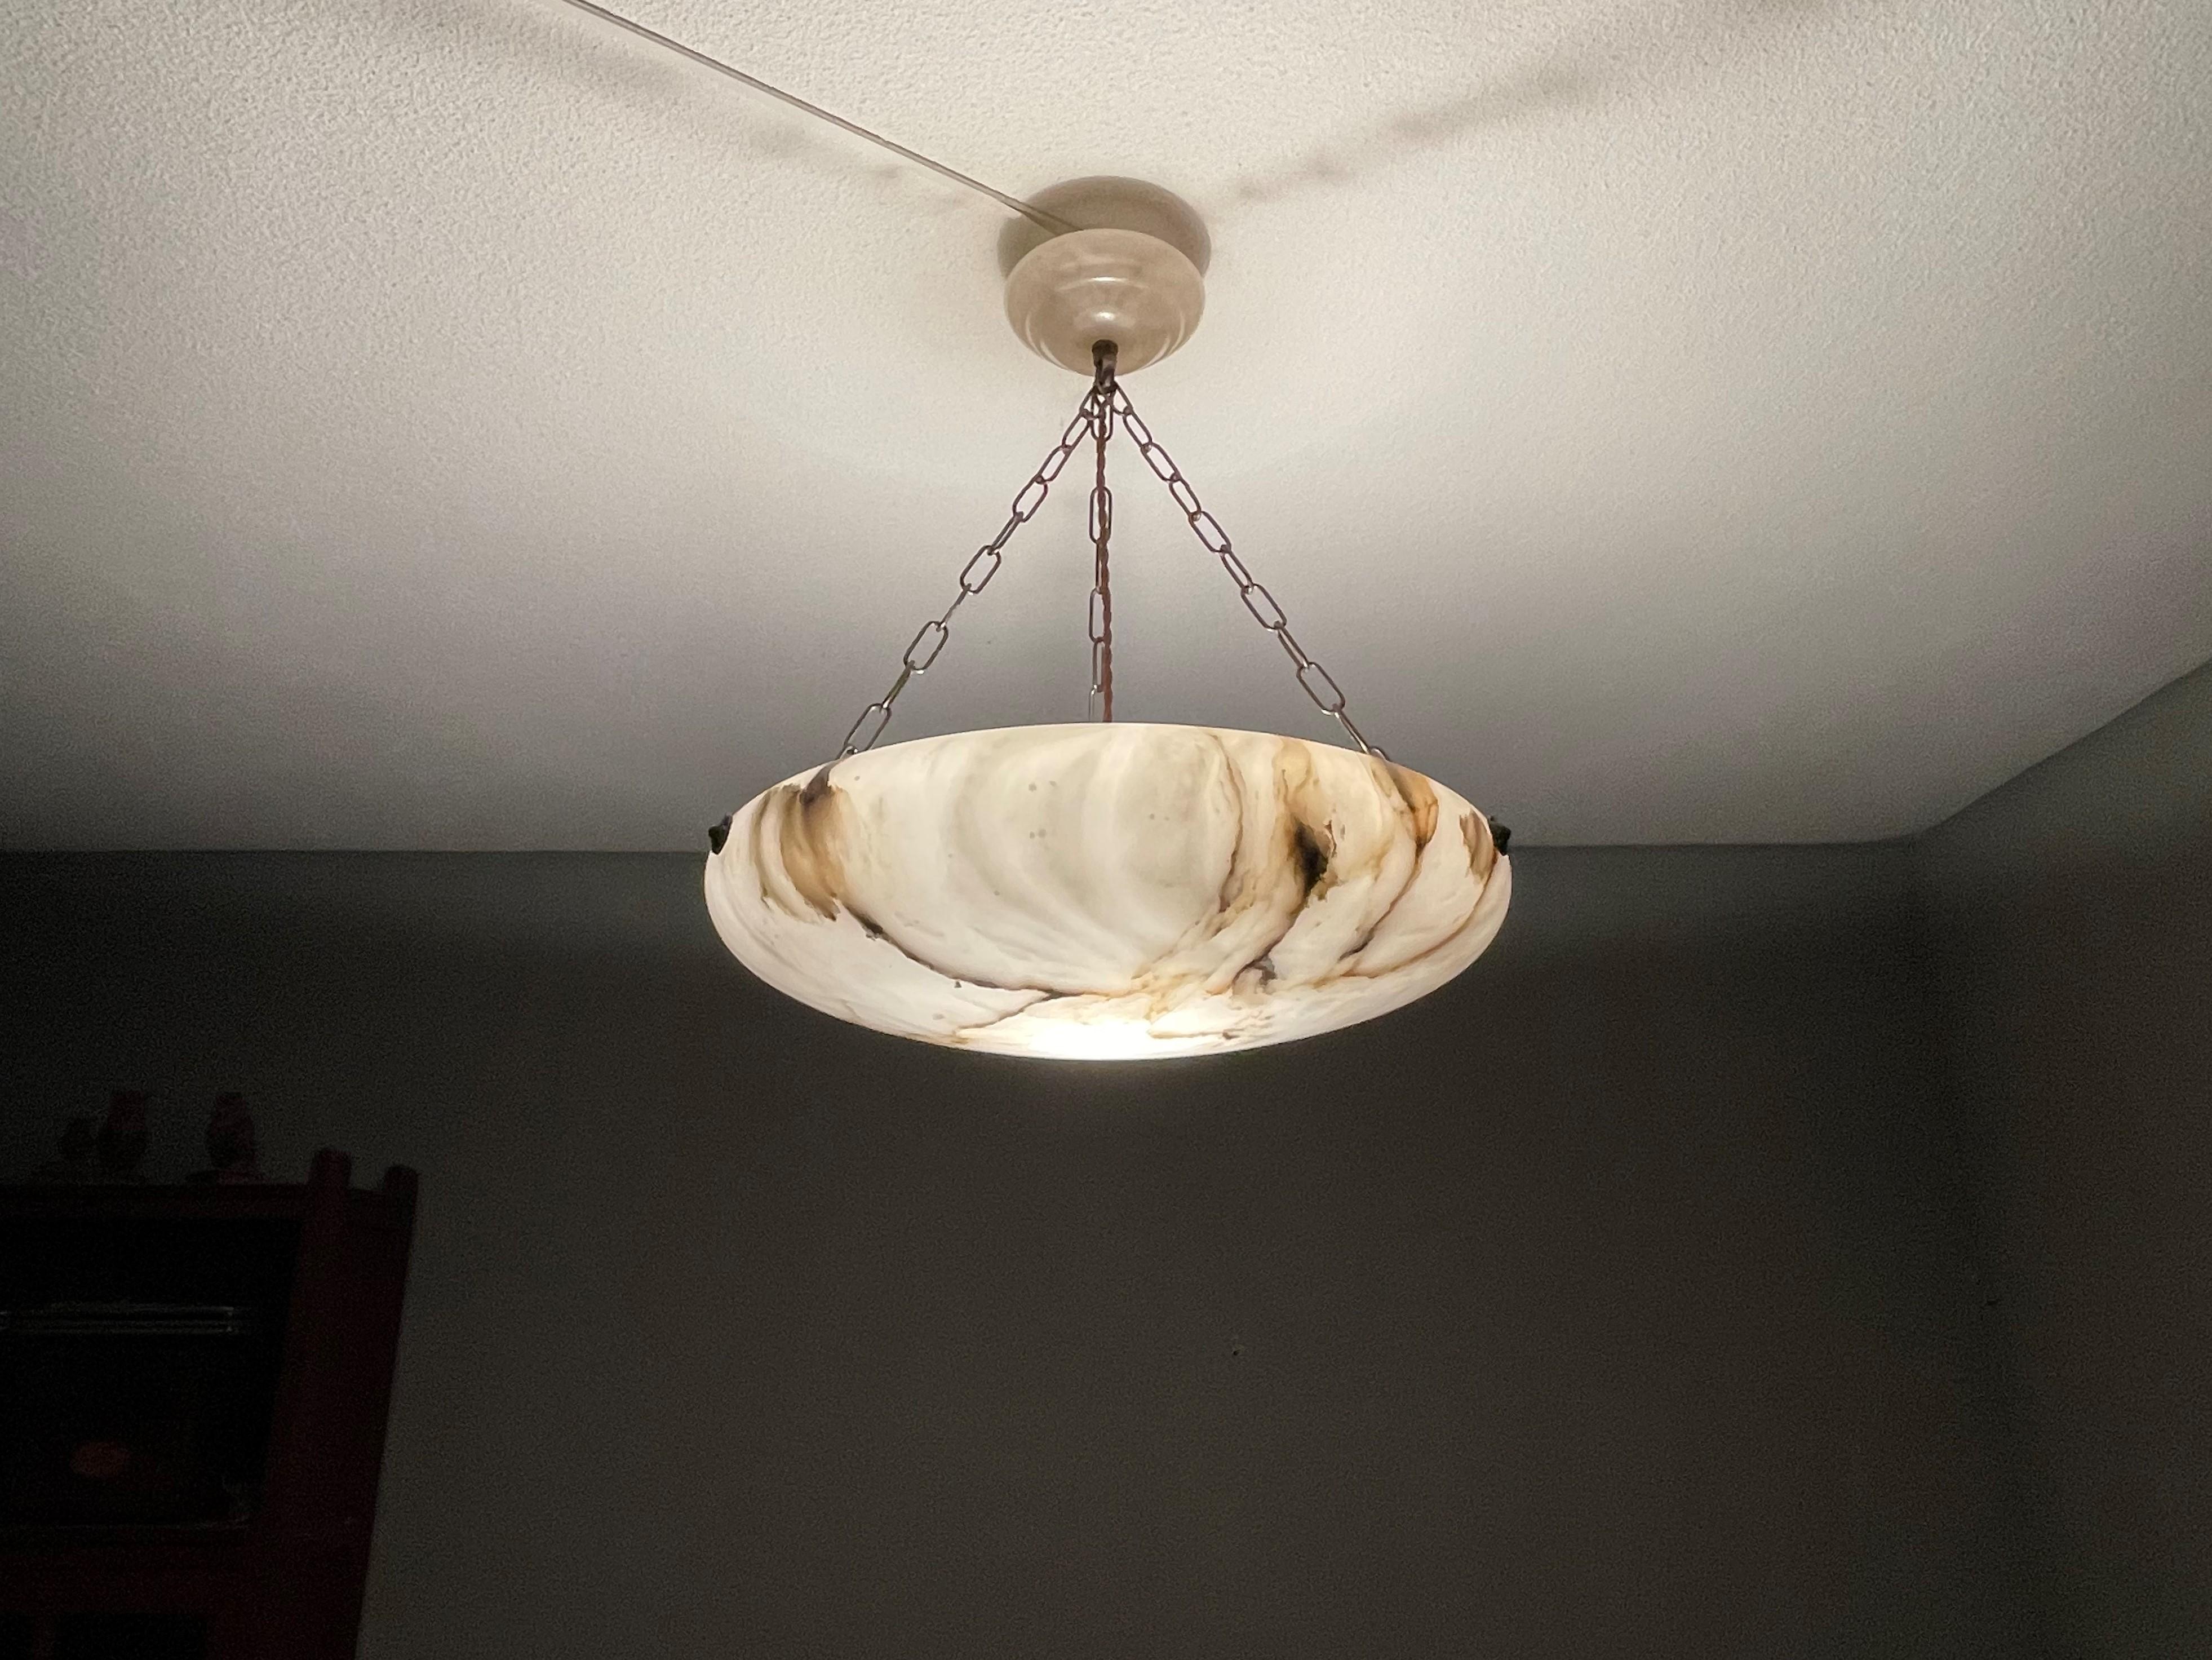 Timeless and large size alabaster pendant / flush mount.

Thanks to its large size, timeless design and good condition this alabaster pendant or flush mount is the perfect lighting solution for many types of rooms and interiors. A remarkably stylish